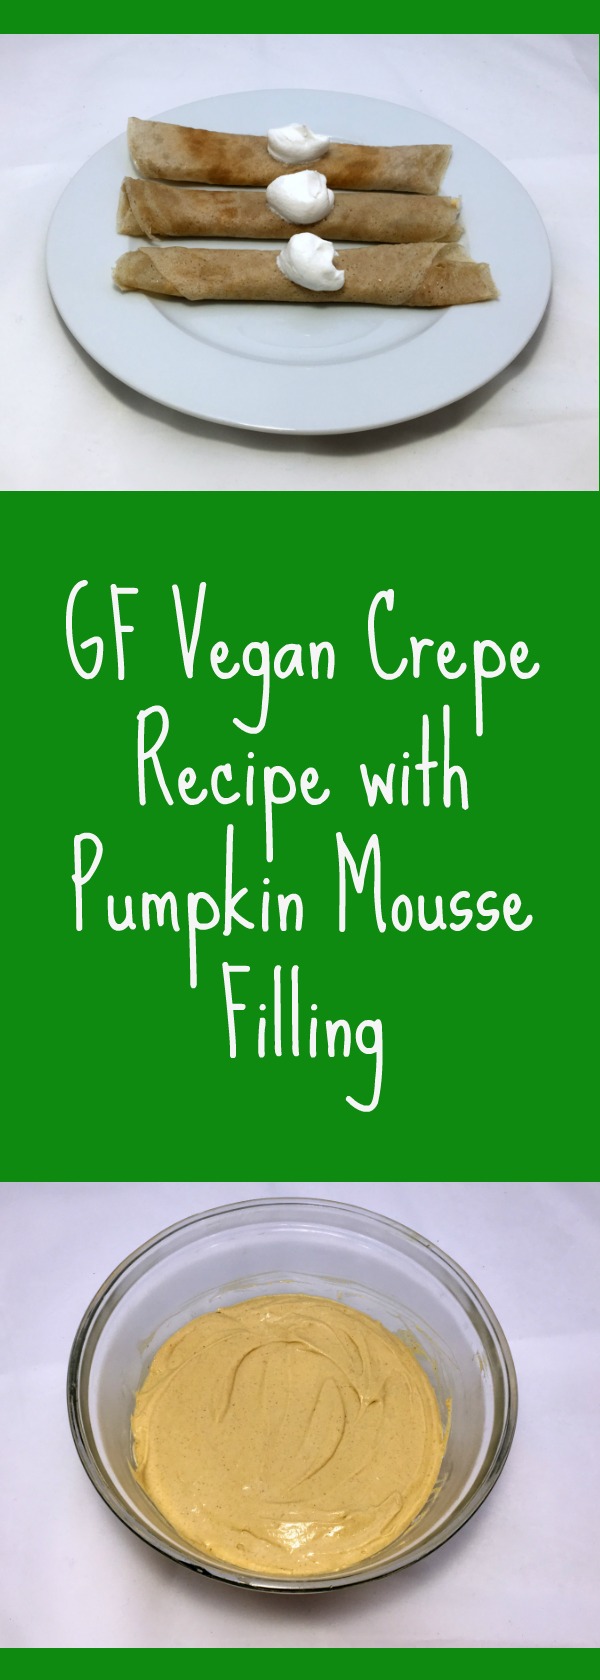 This GF Vegan Pumpkin Crepe Recipe is the perfect make-ahead meal for Christmas morning or a potluck brunch!